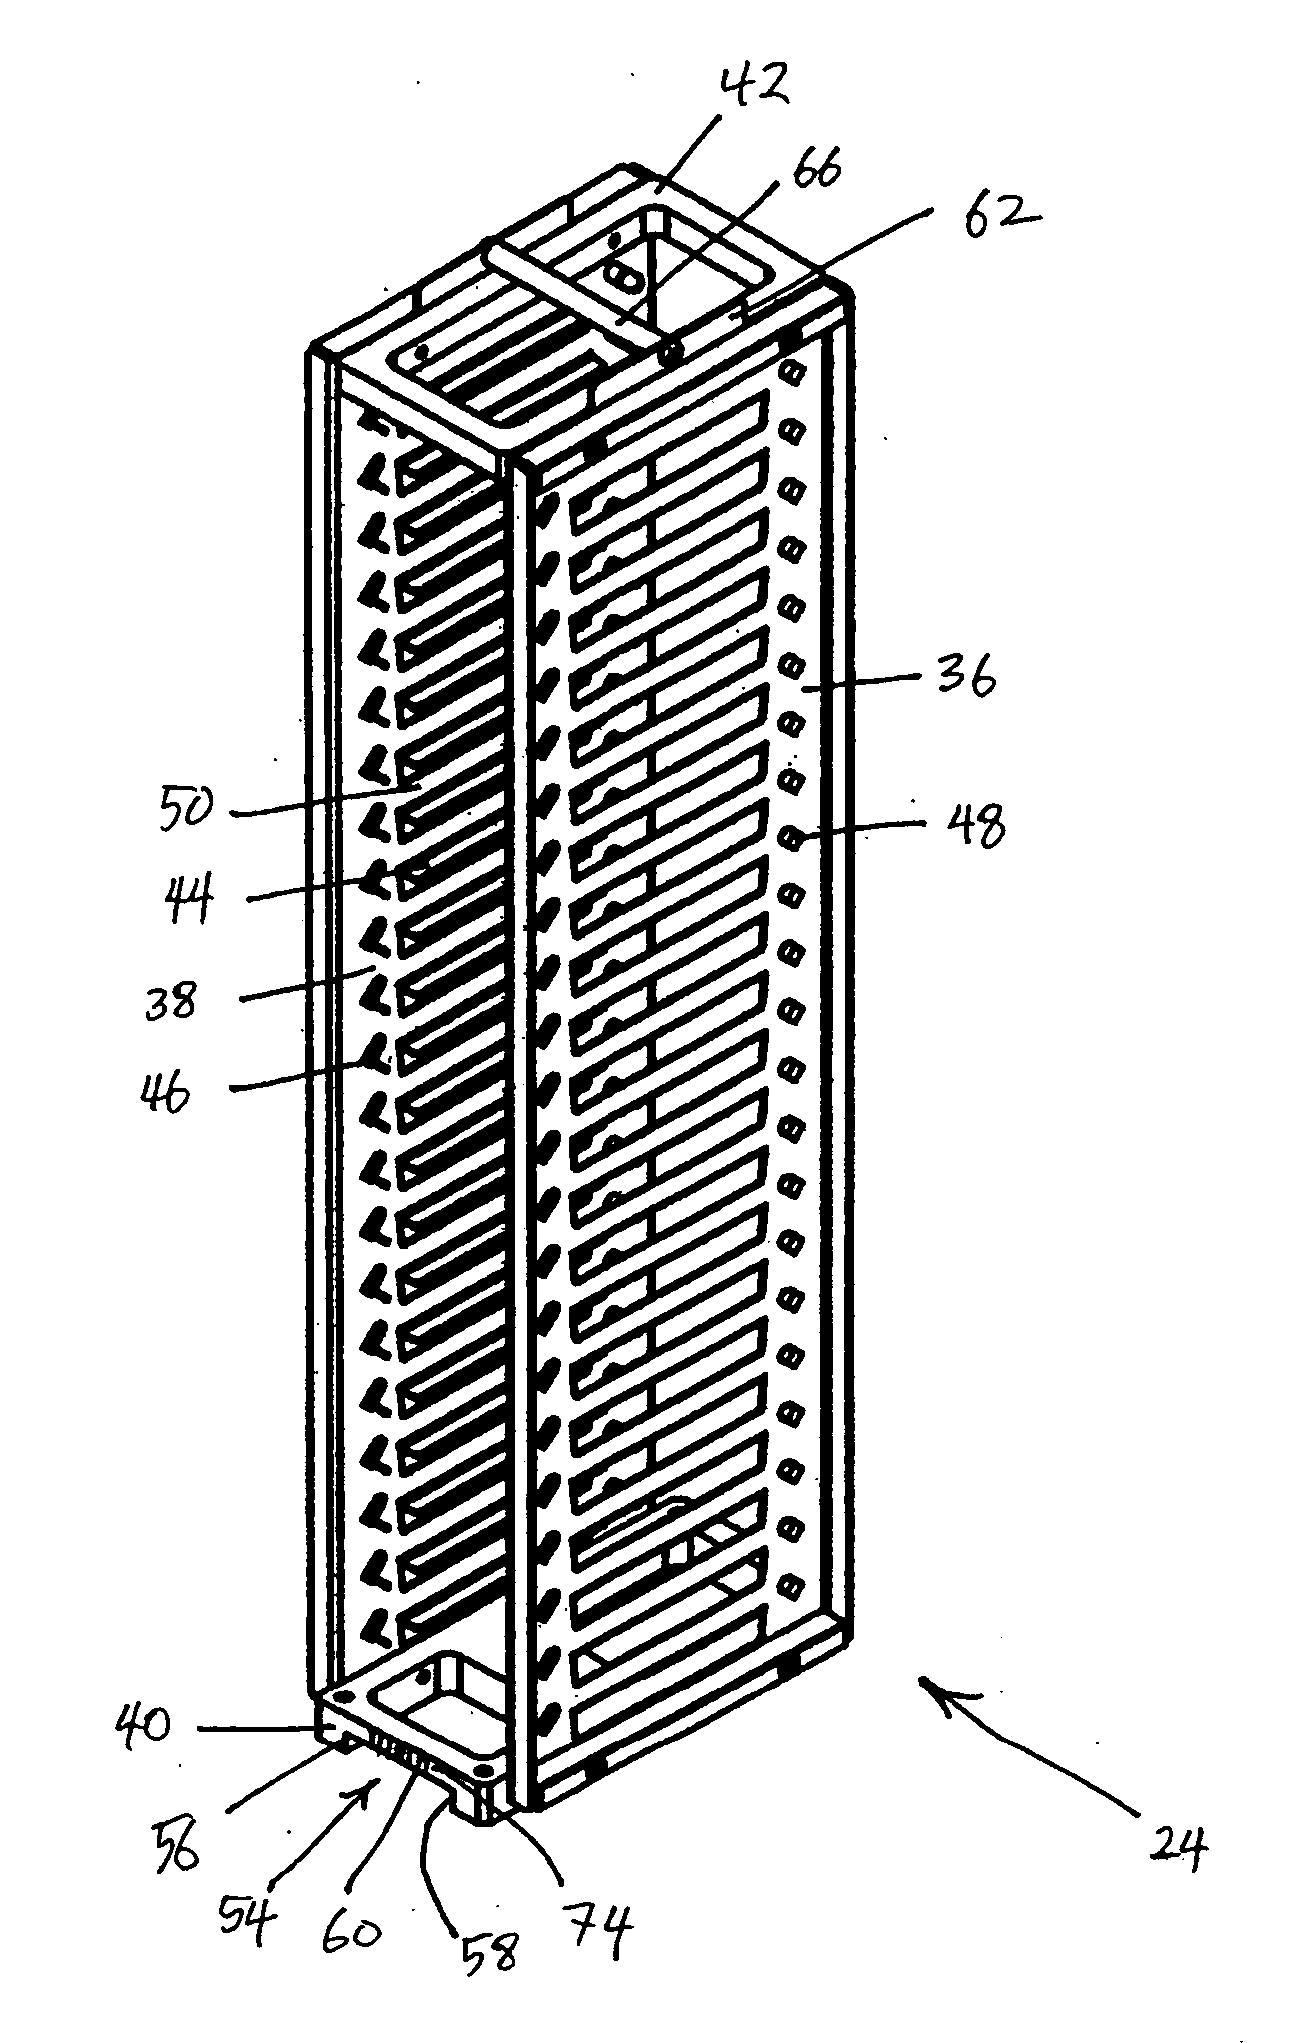 Microplate storage apparatus and method